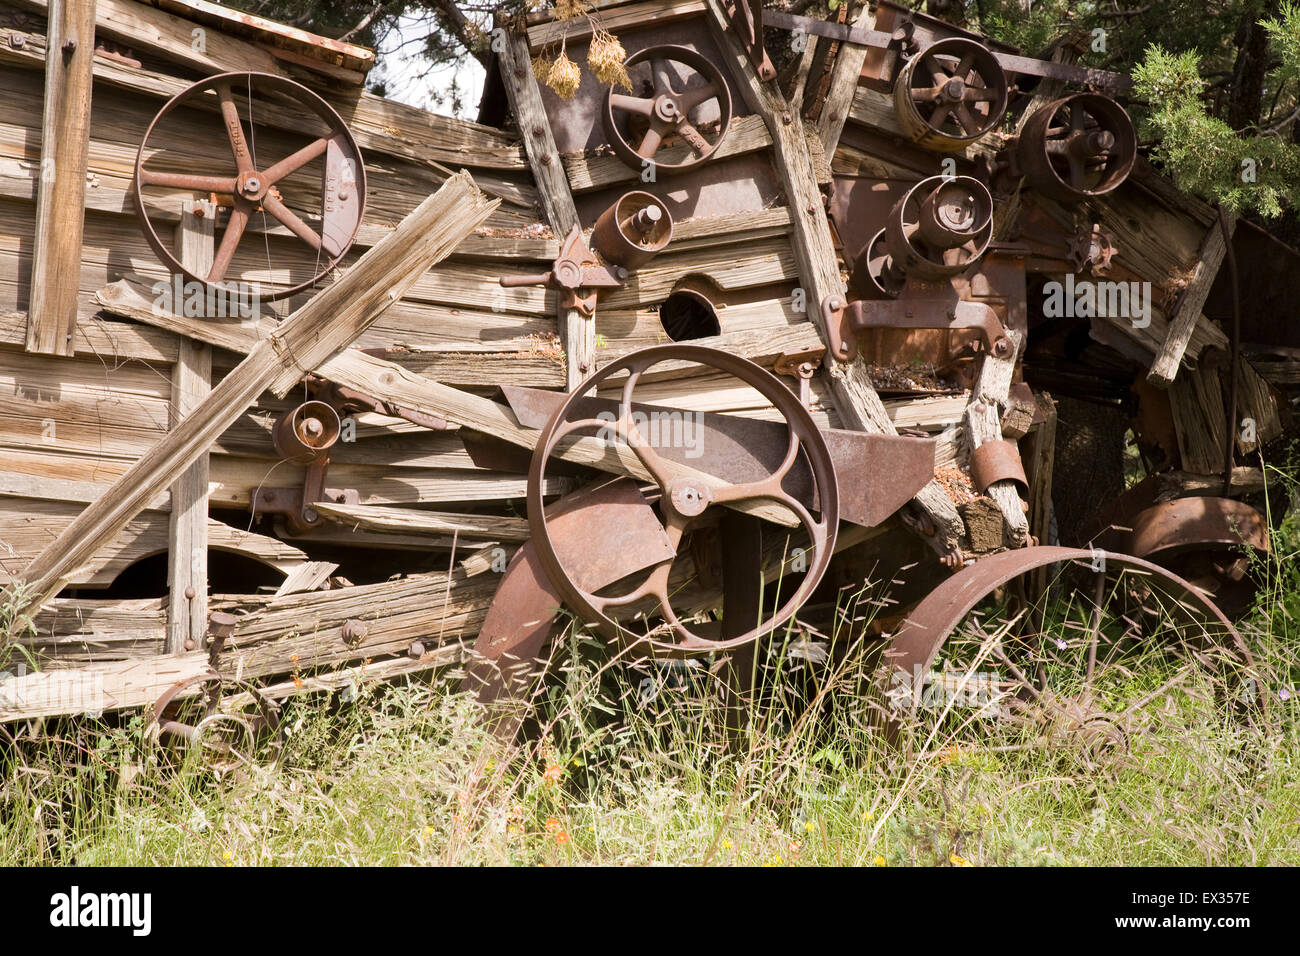 Discarded mining machinery from the late 1800s still stands around in the old gold mining town of Pinos Altos, near Silver City, Stock Photo